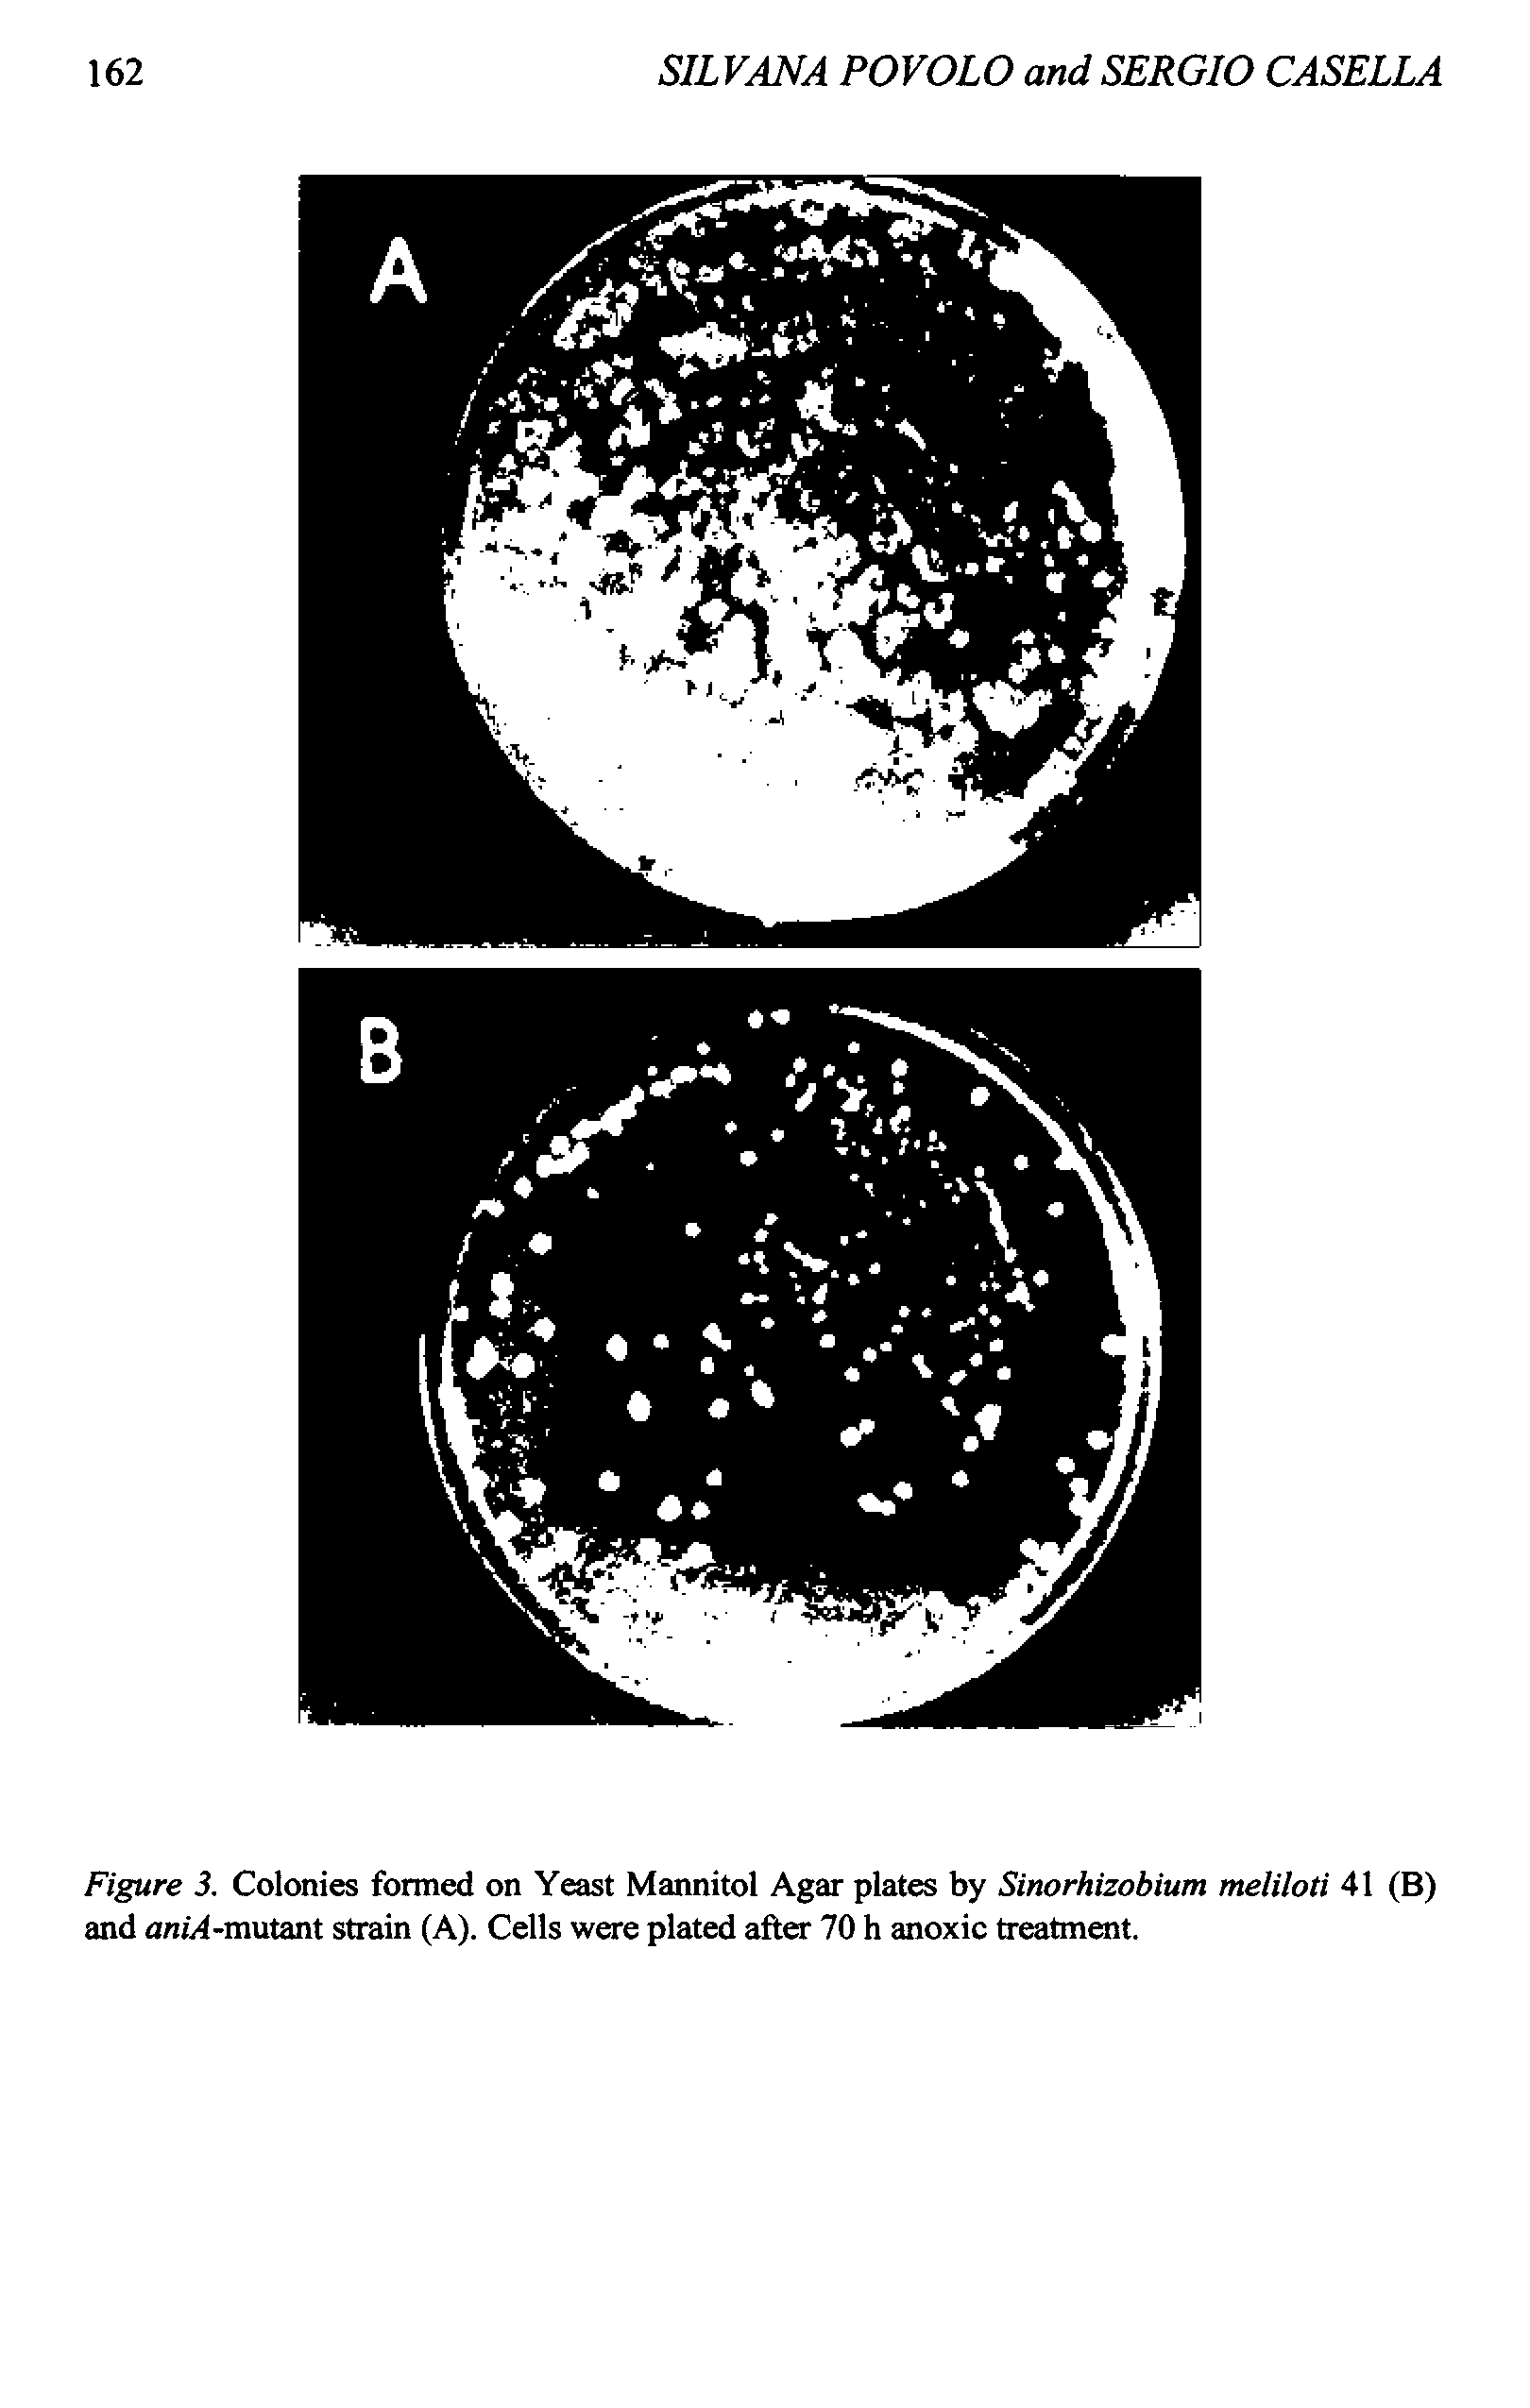 Figure 3. Colonies formed on Yeast Mannitol Agar plates by Sinorhizobium meliloti 41 (B) and aniA-mutant strain (A). Cells were plated after 70 h anoxic treatment.